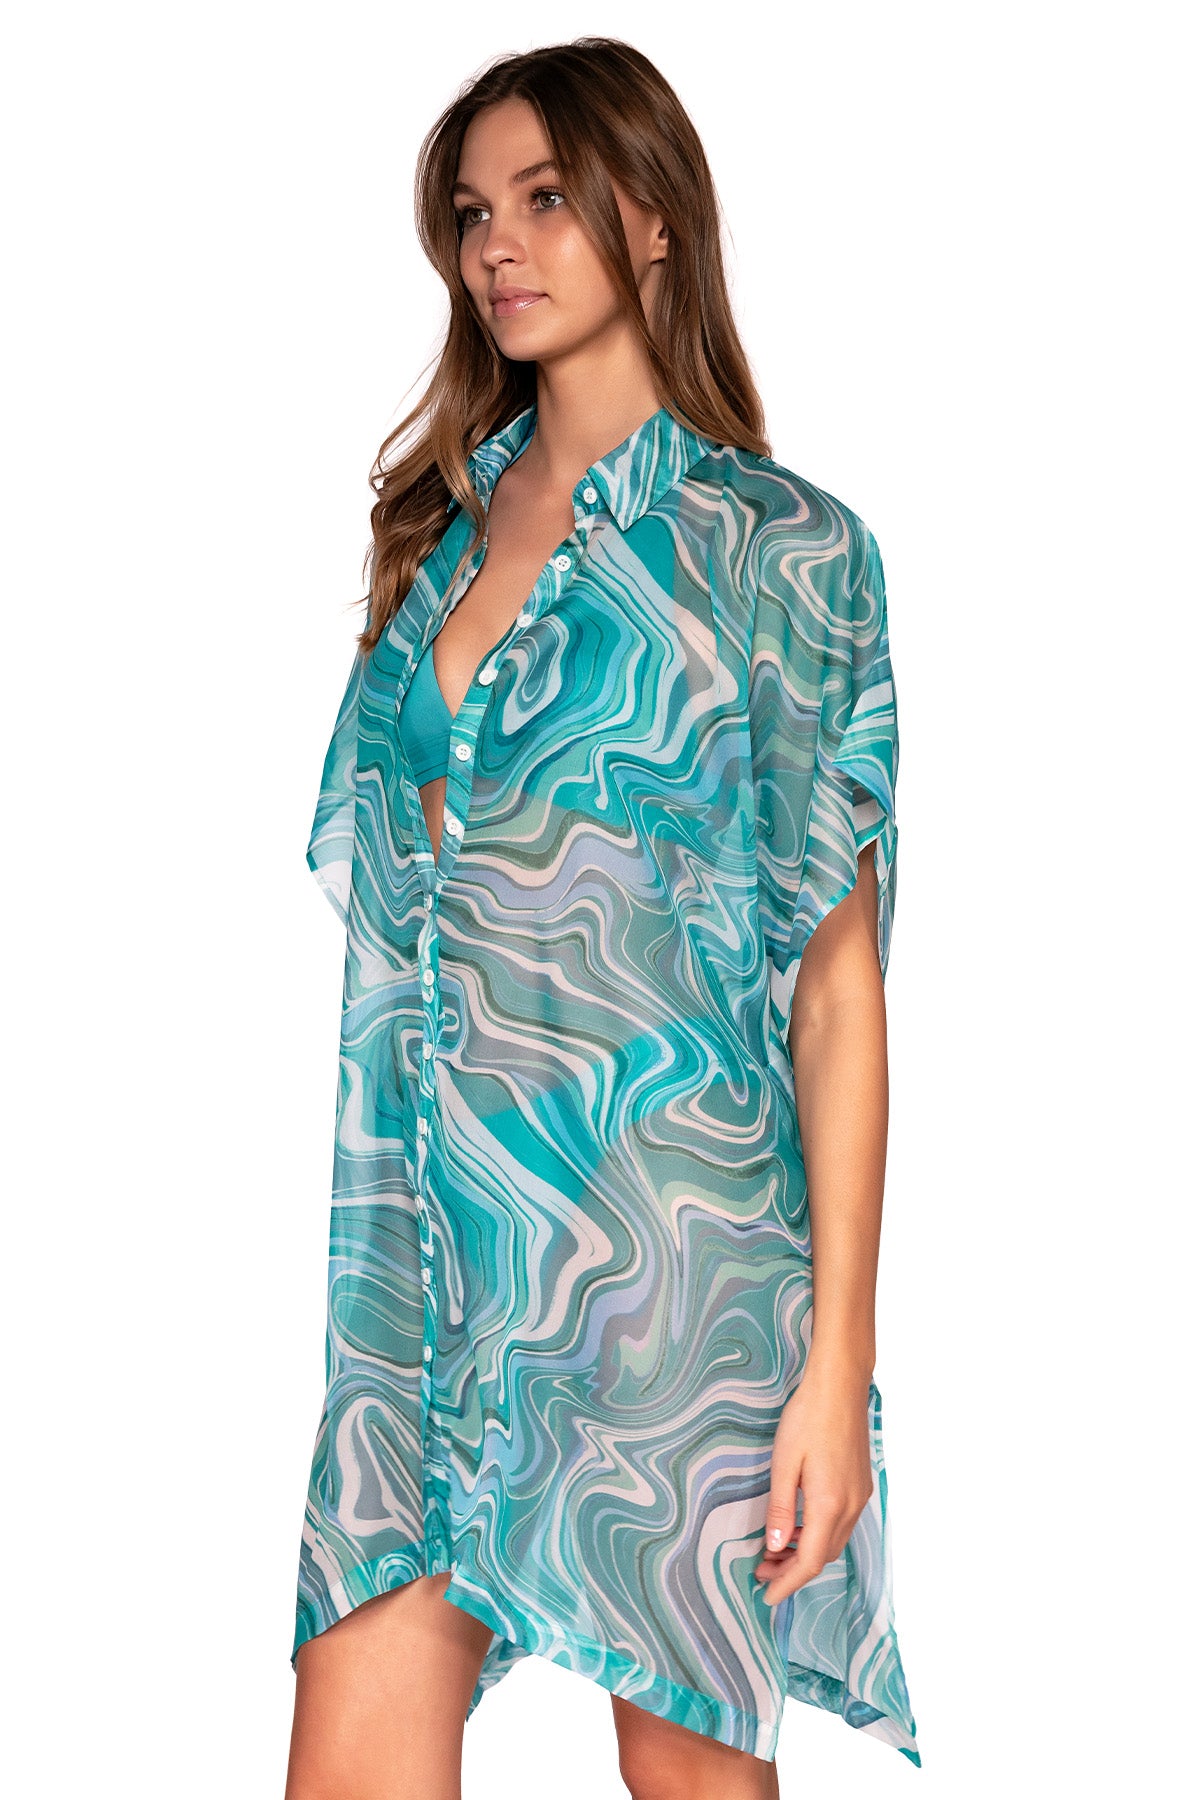 Side view of Sunsets Moon Tide Shore Thing Tunic